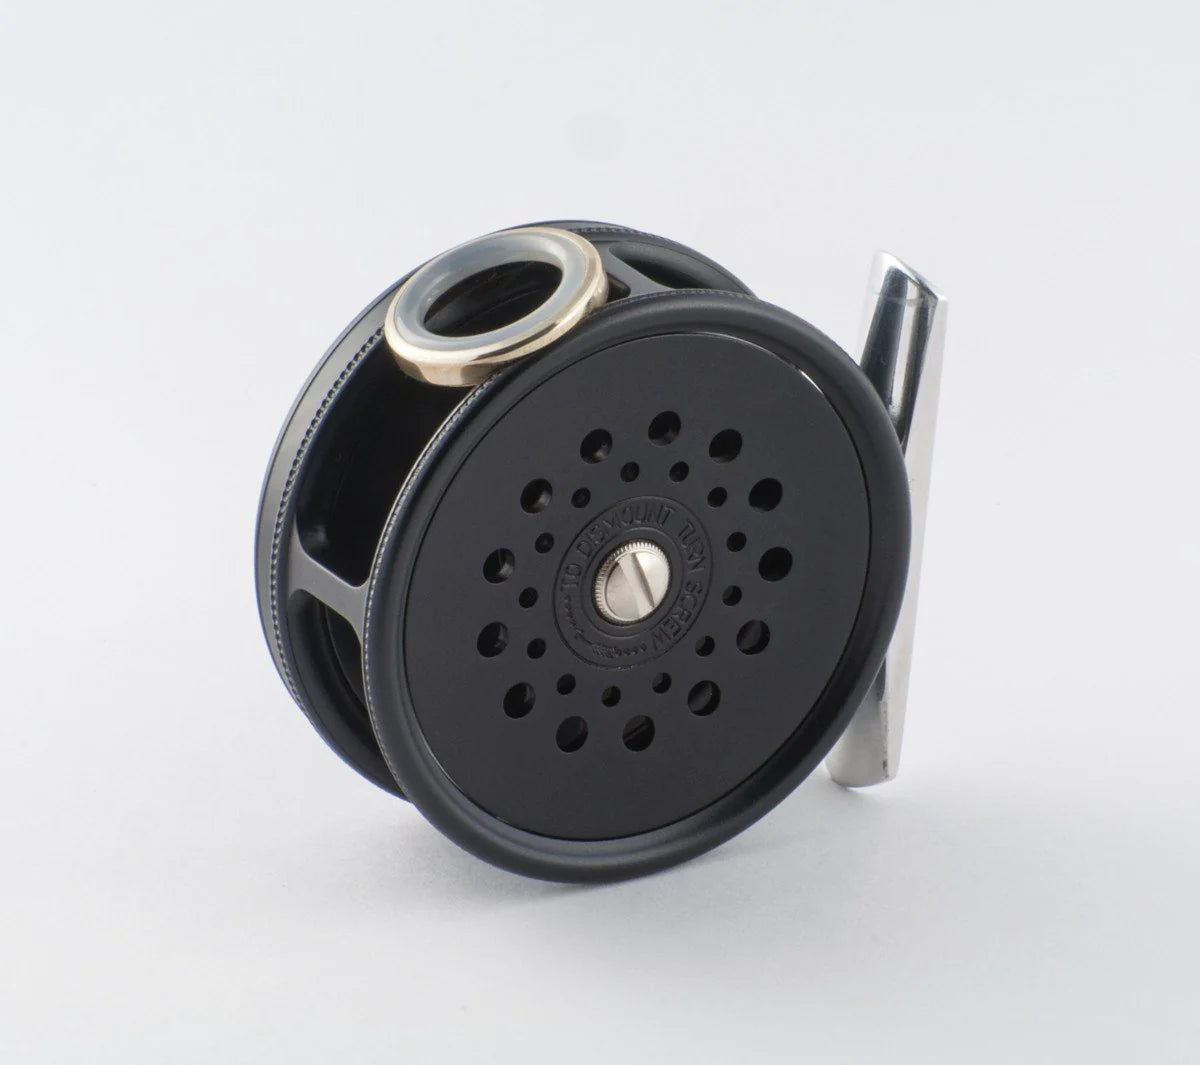 Hardy Perfect Fly Reel